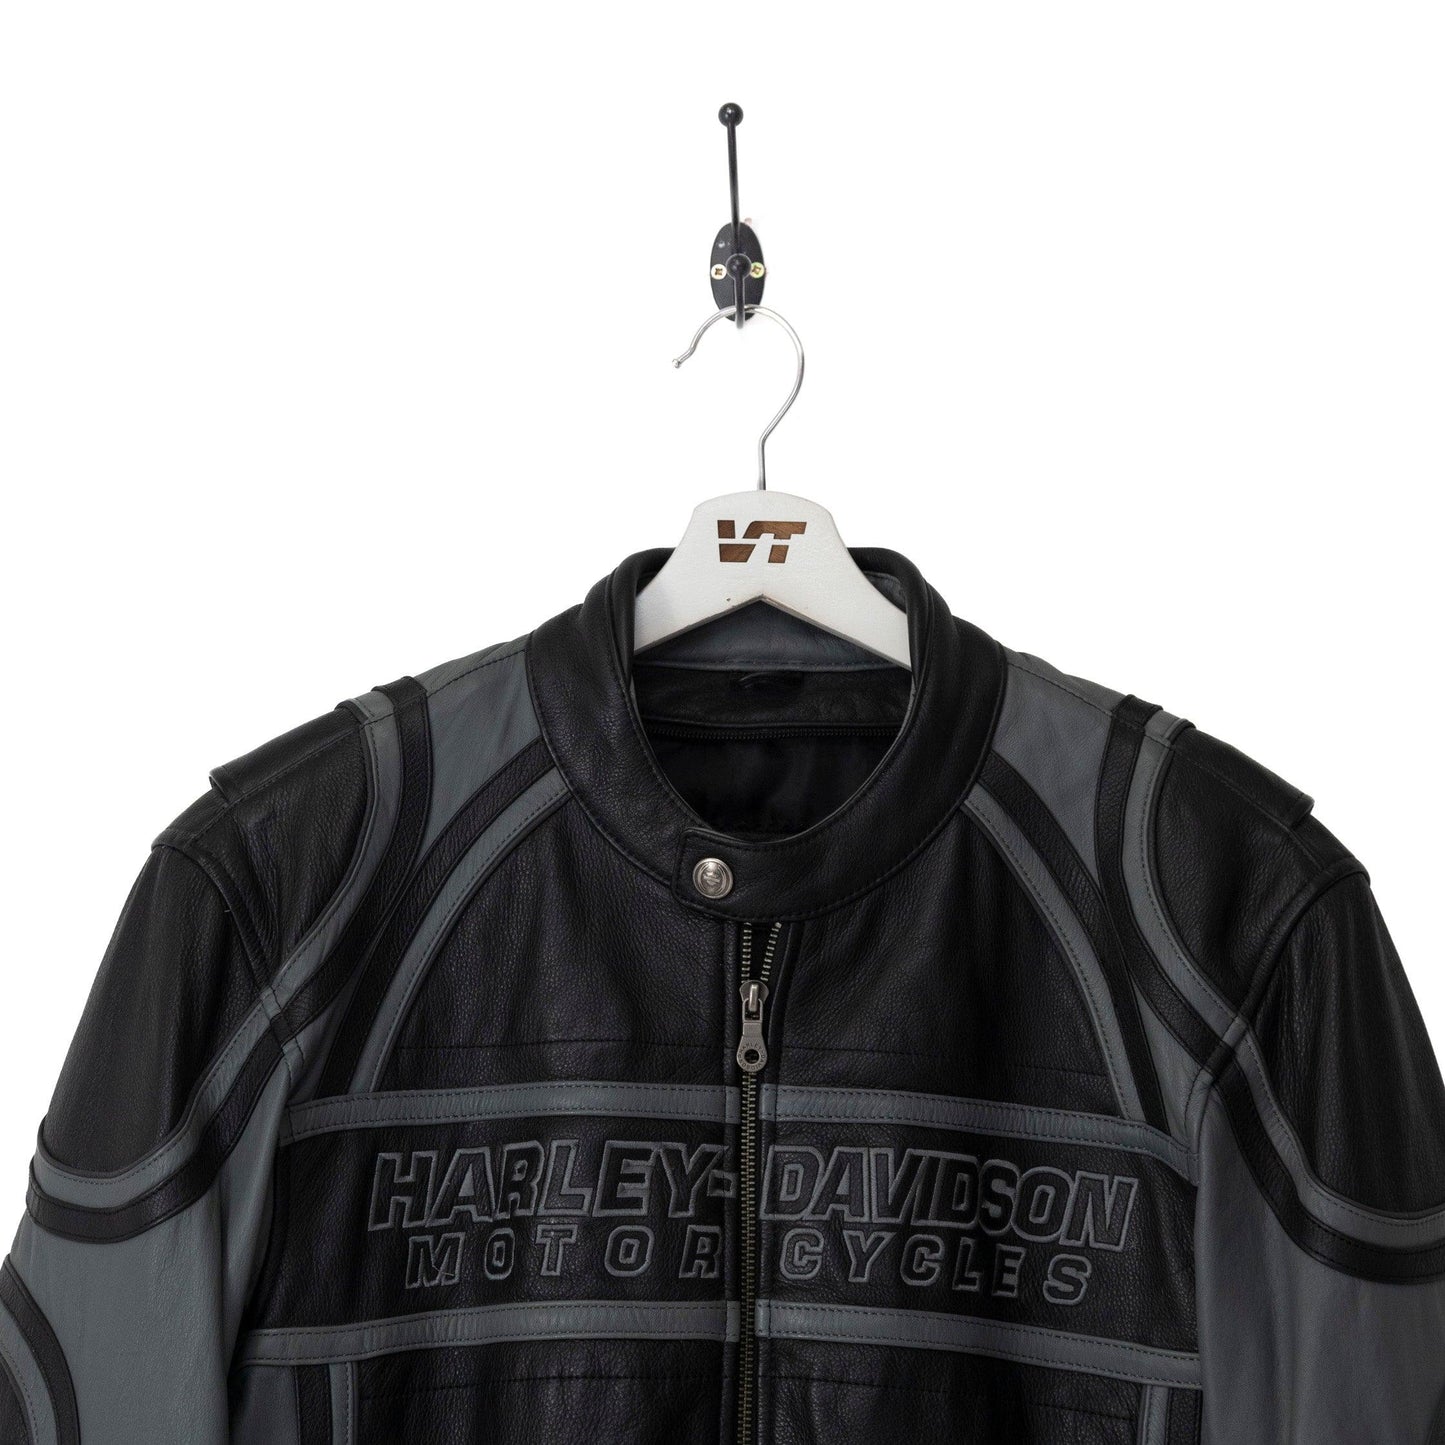 Harley Davidson Two-Tone Leather Jacket - Known Source